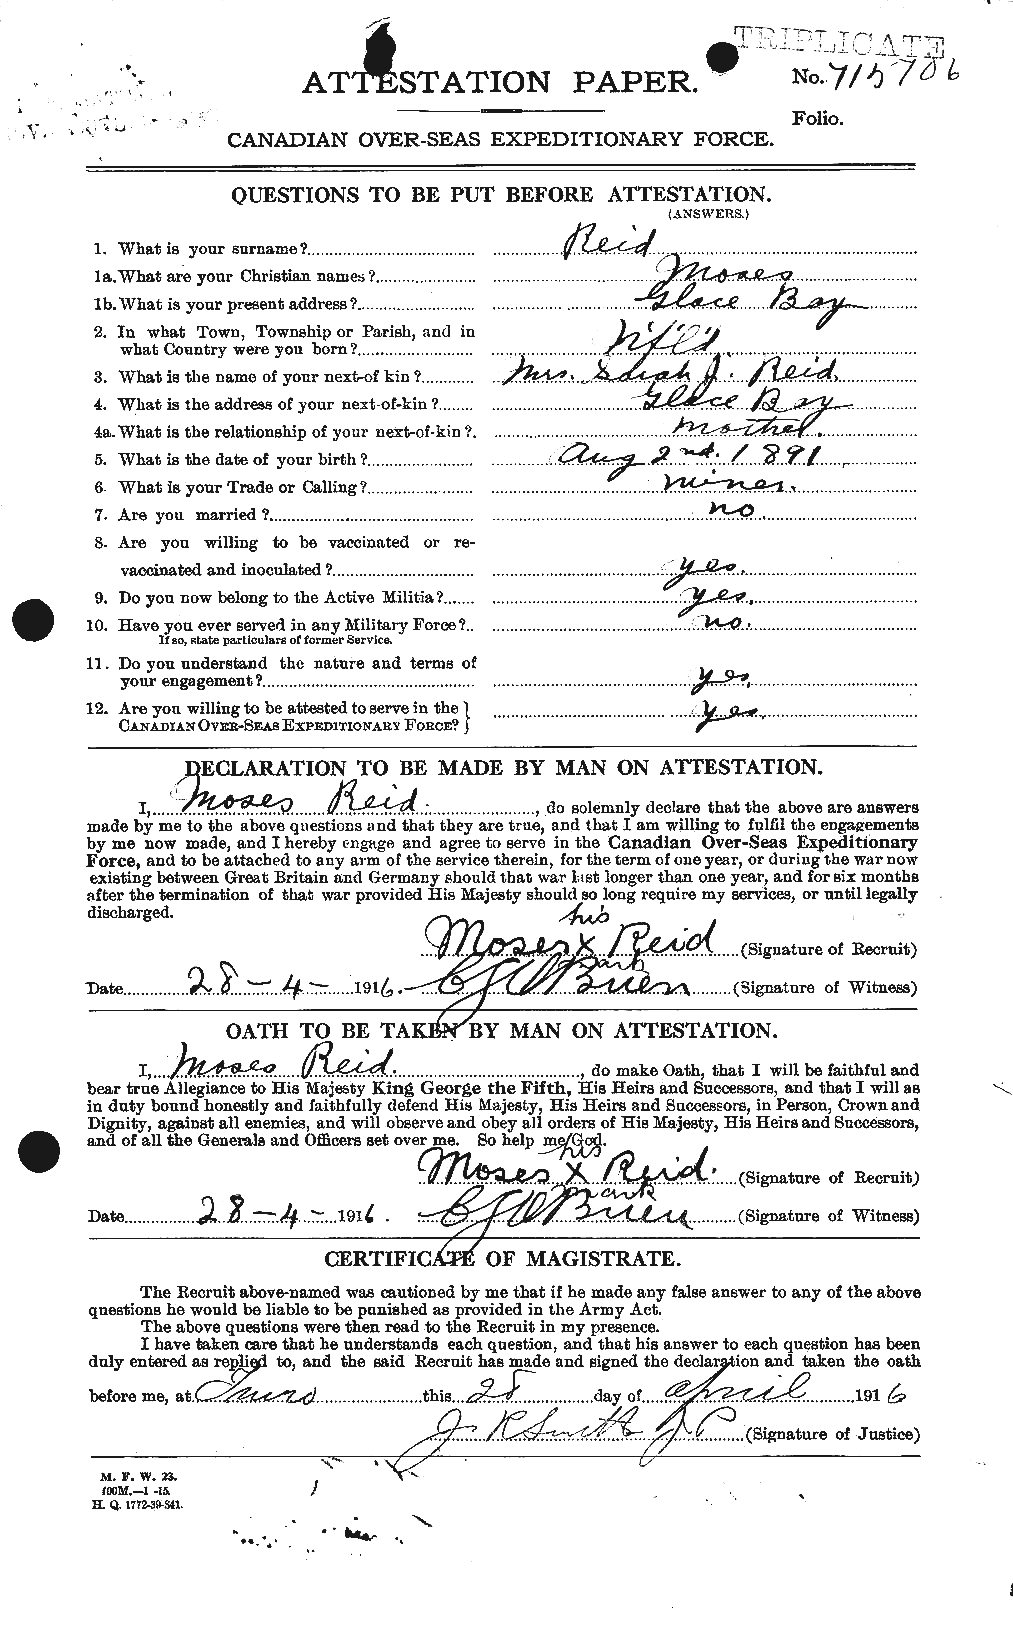 Personnel Records of the First World War - CEF 598957a